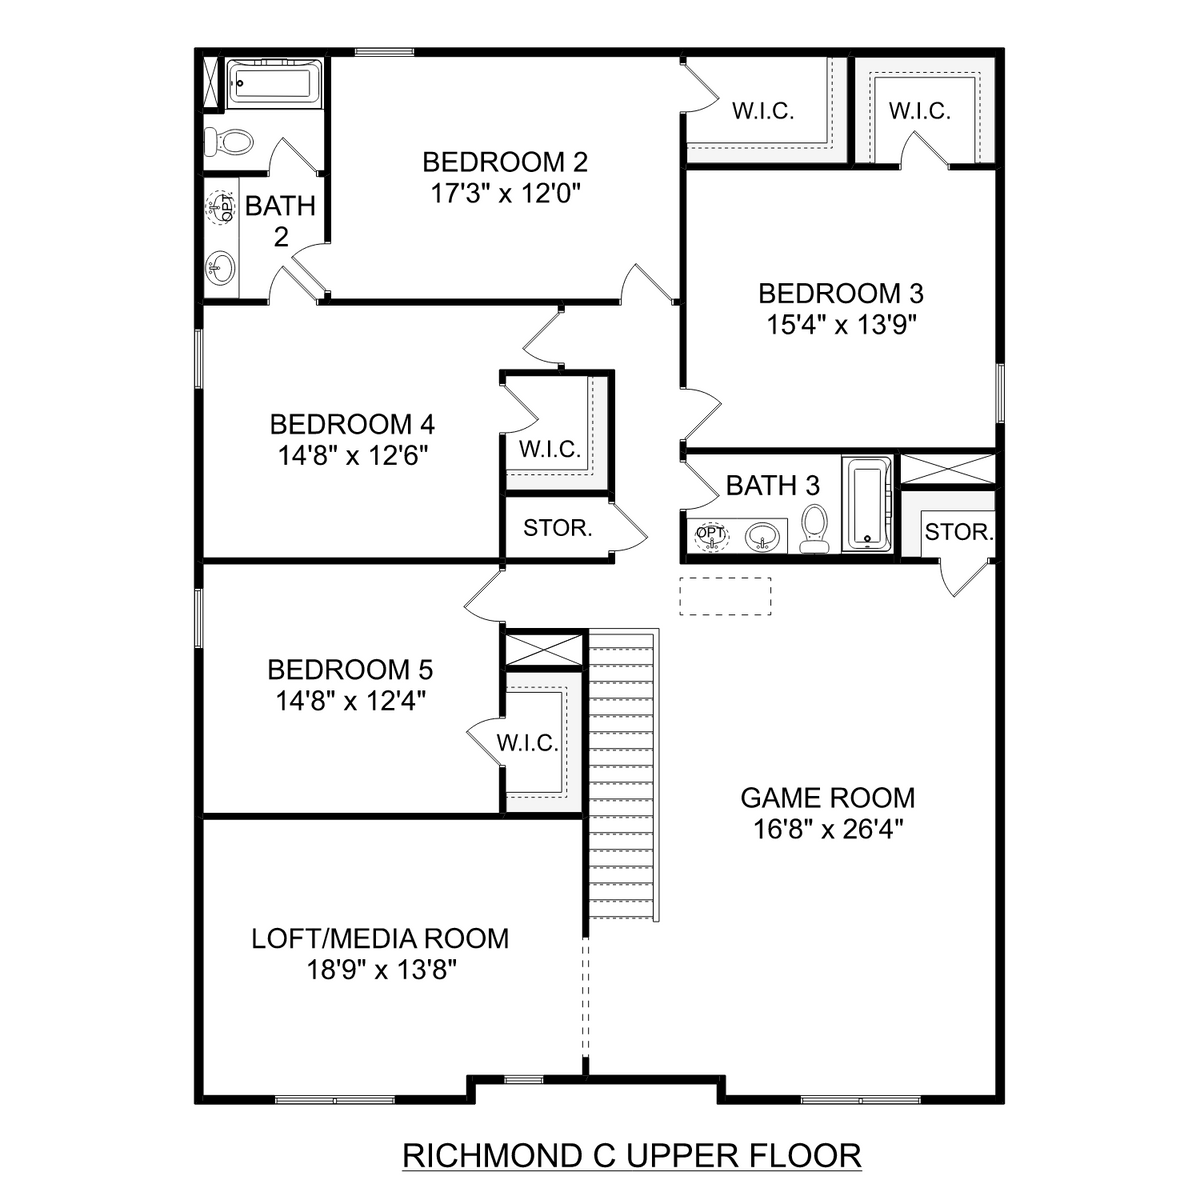 2 - The Richmond C floor plan layout for 2160 McAfee Rd in Davidson Homes' The Reserve at North Ridge community.